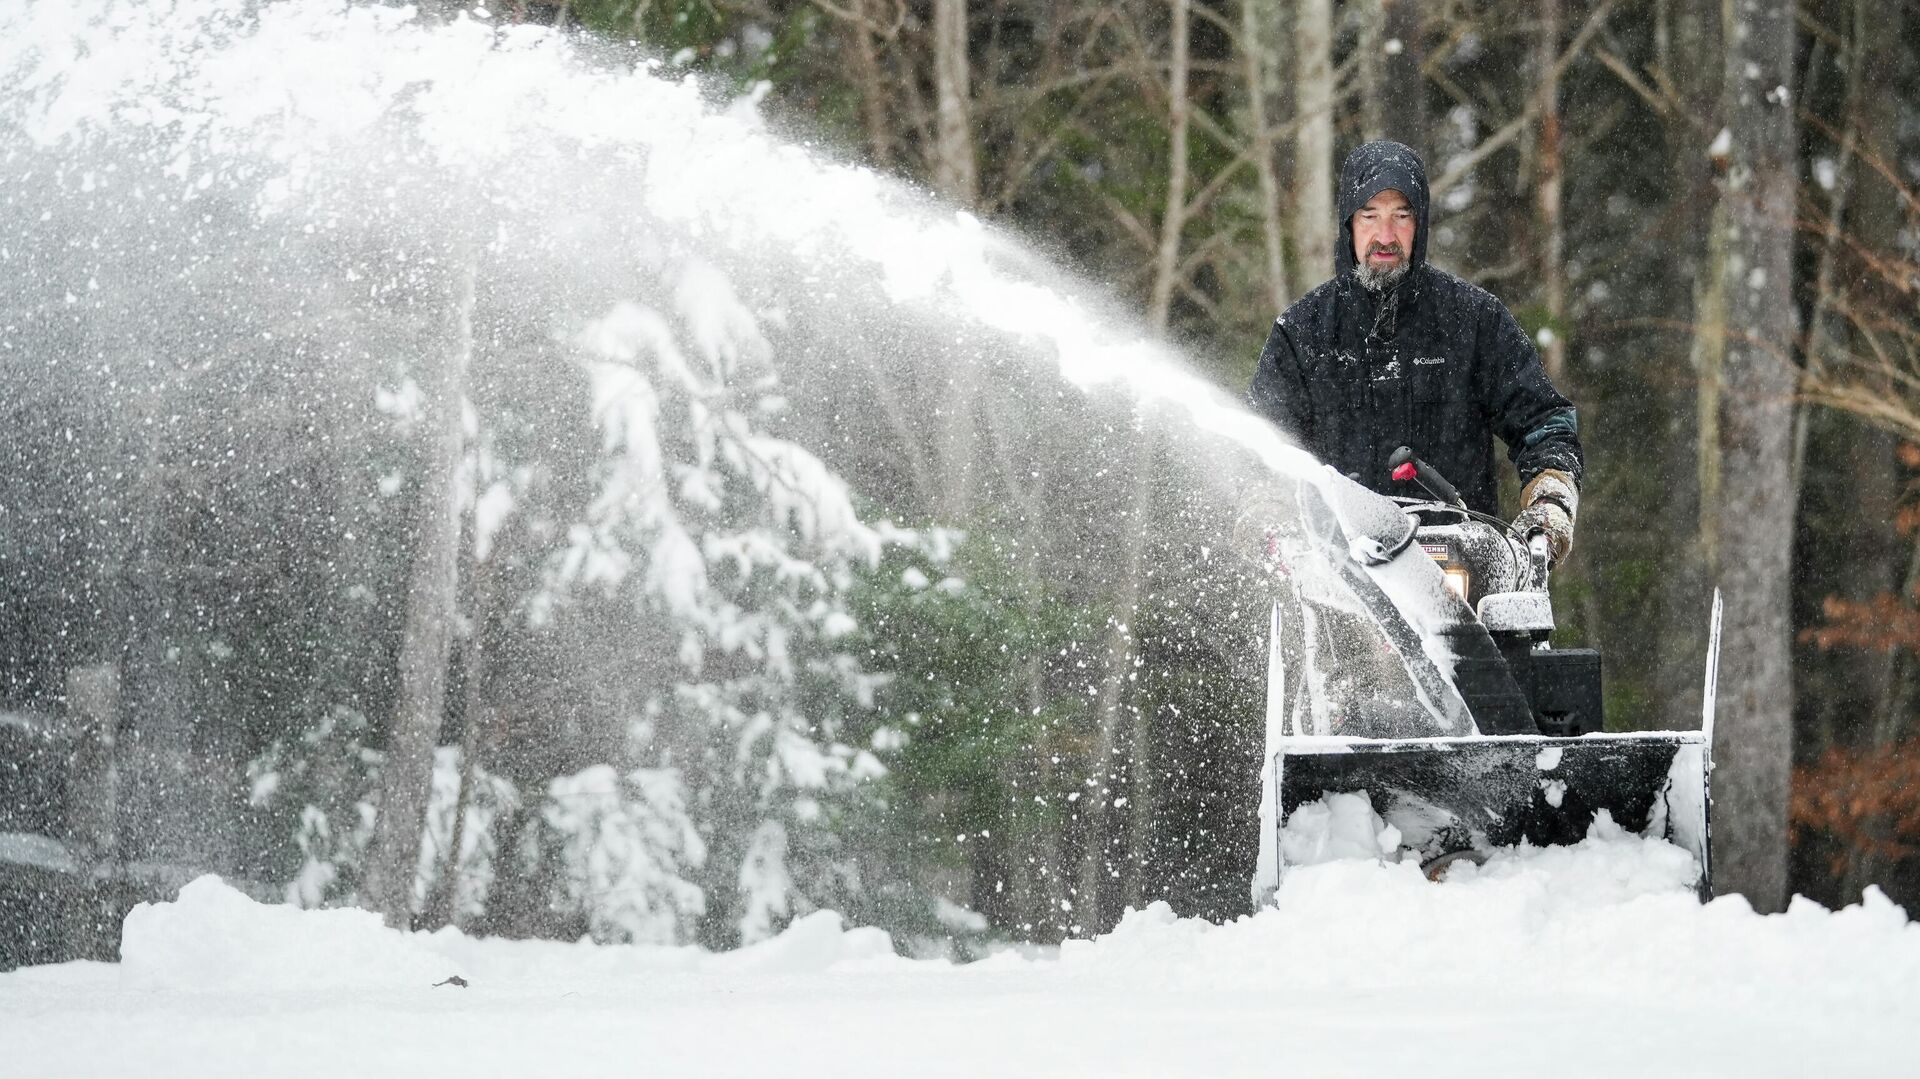 Jim Long uses his snow blower to clear a pile of snow from his driveway during a winter storm, Sunday, Jan. 16, 2022 in Morganton, N.C. A coat of ice underneath snow-covered roads made it hard to walk and clear driveways - Sputnik International, 1920, 23.01.2022